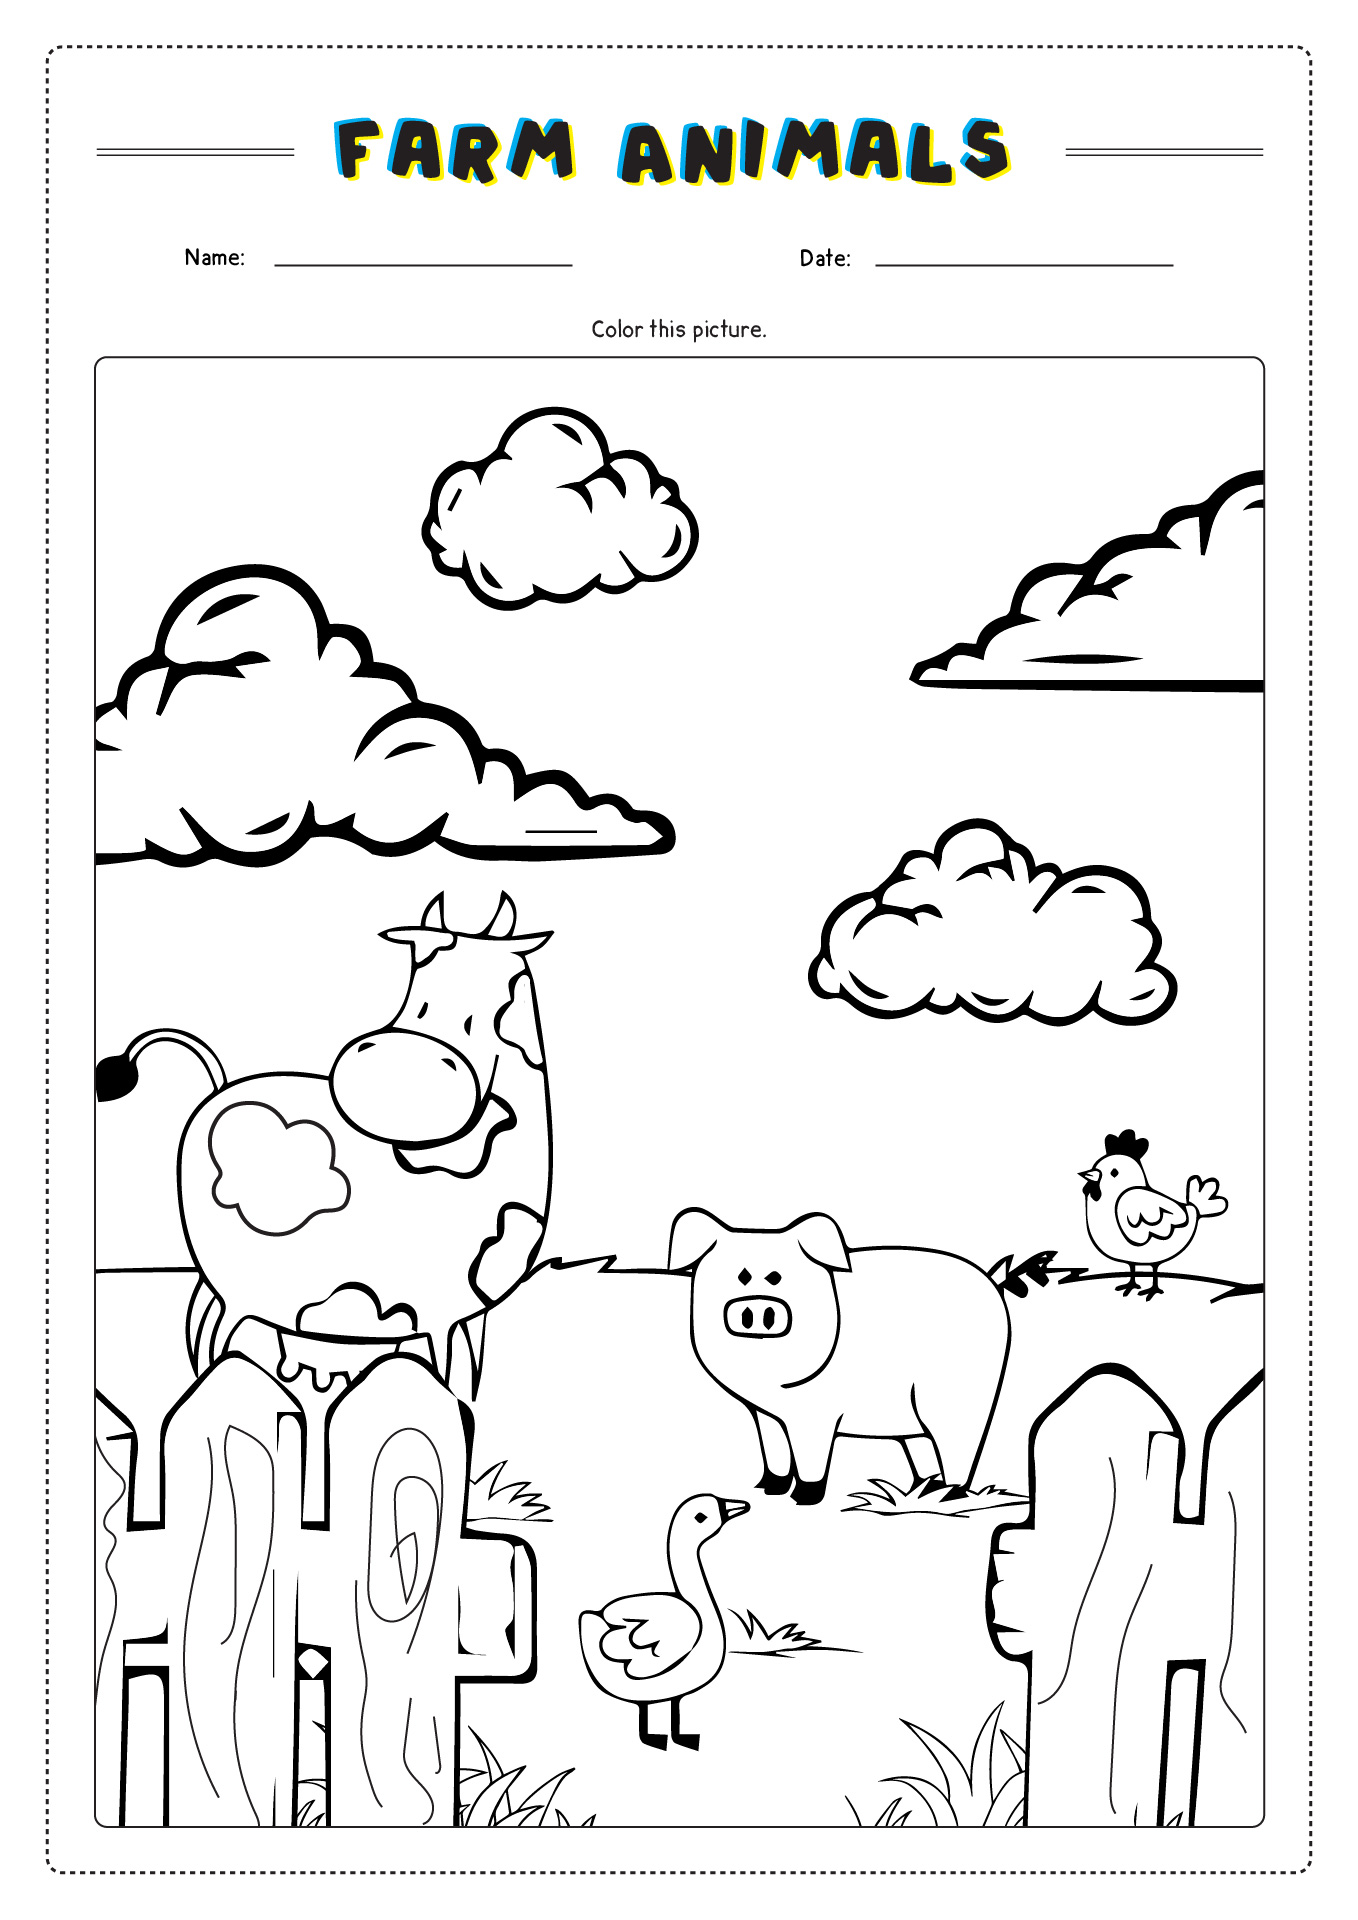 10-best-images-of-farm-animals-worksheets-for-kids